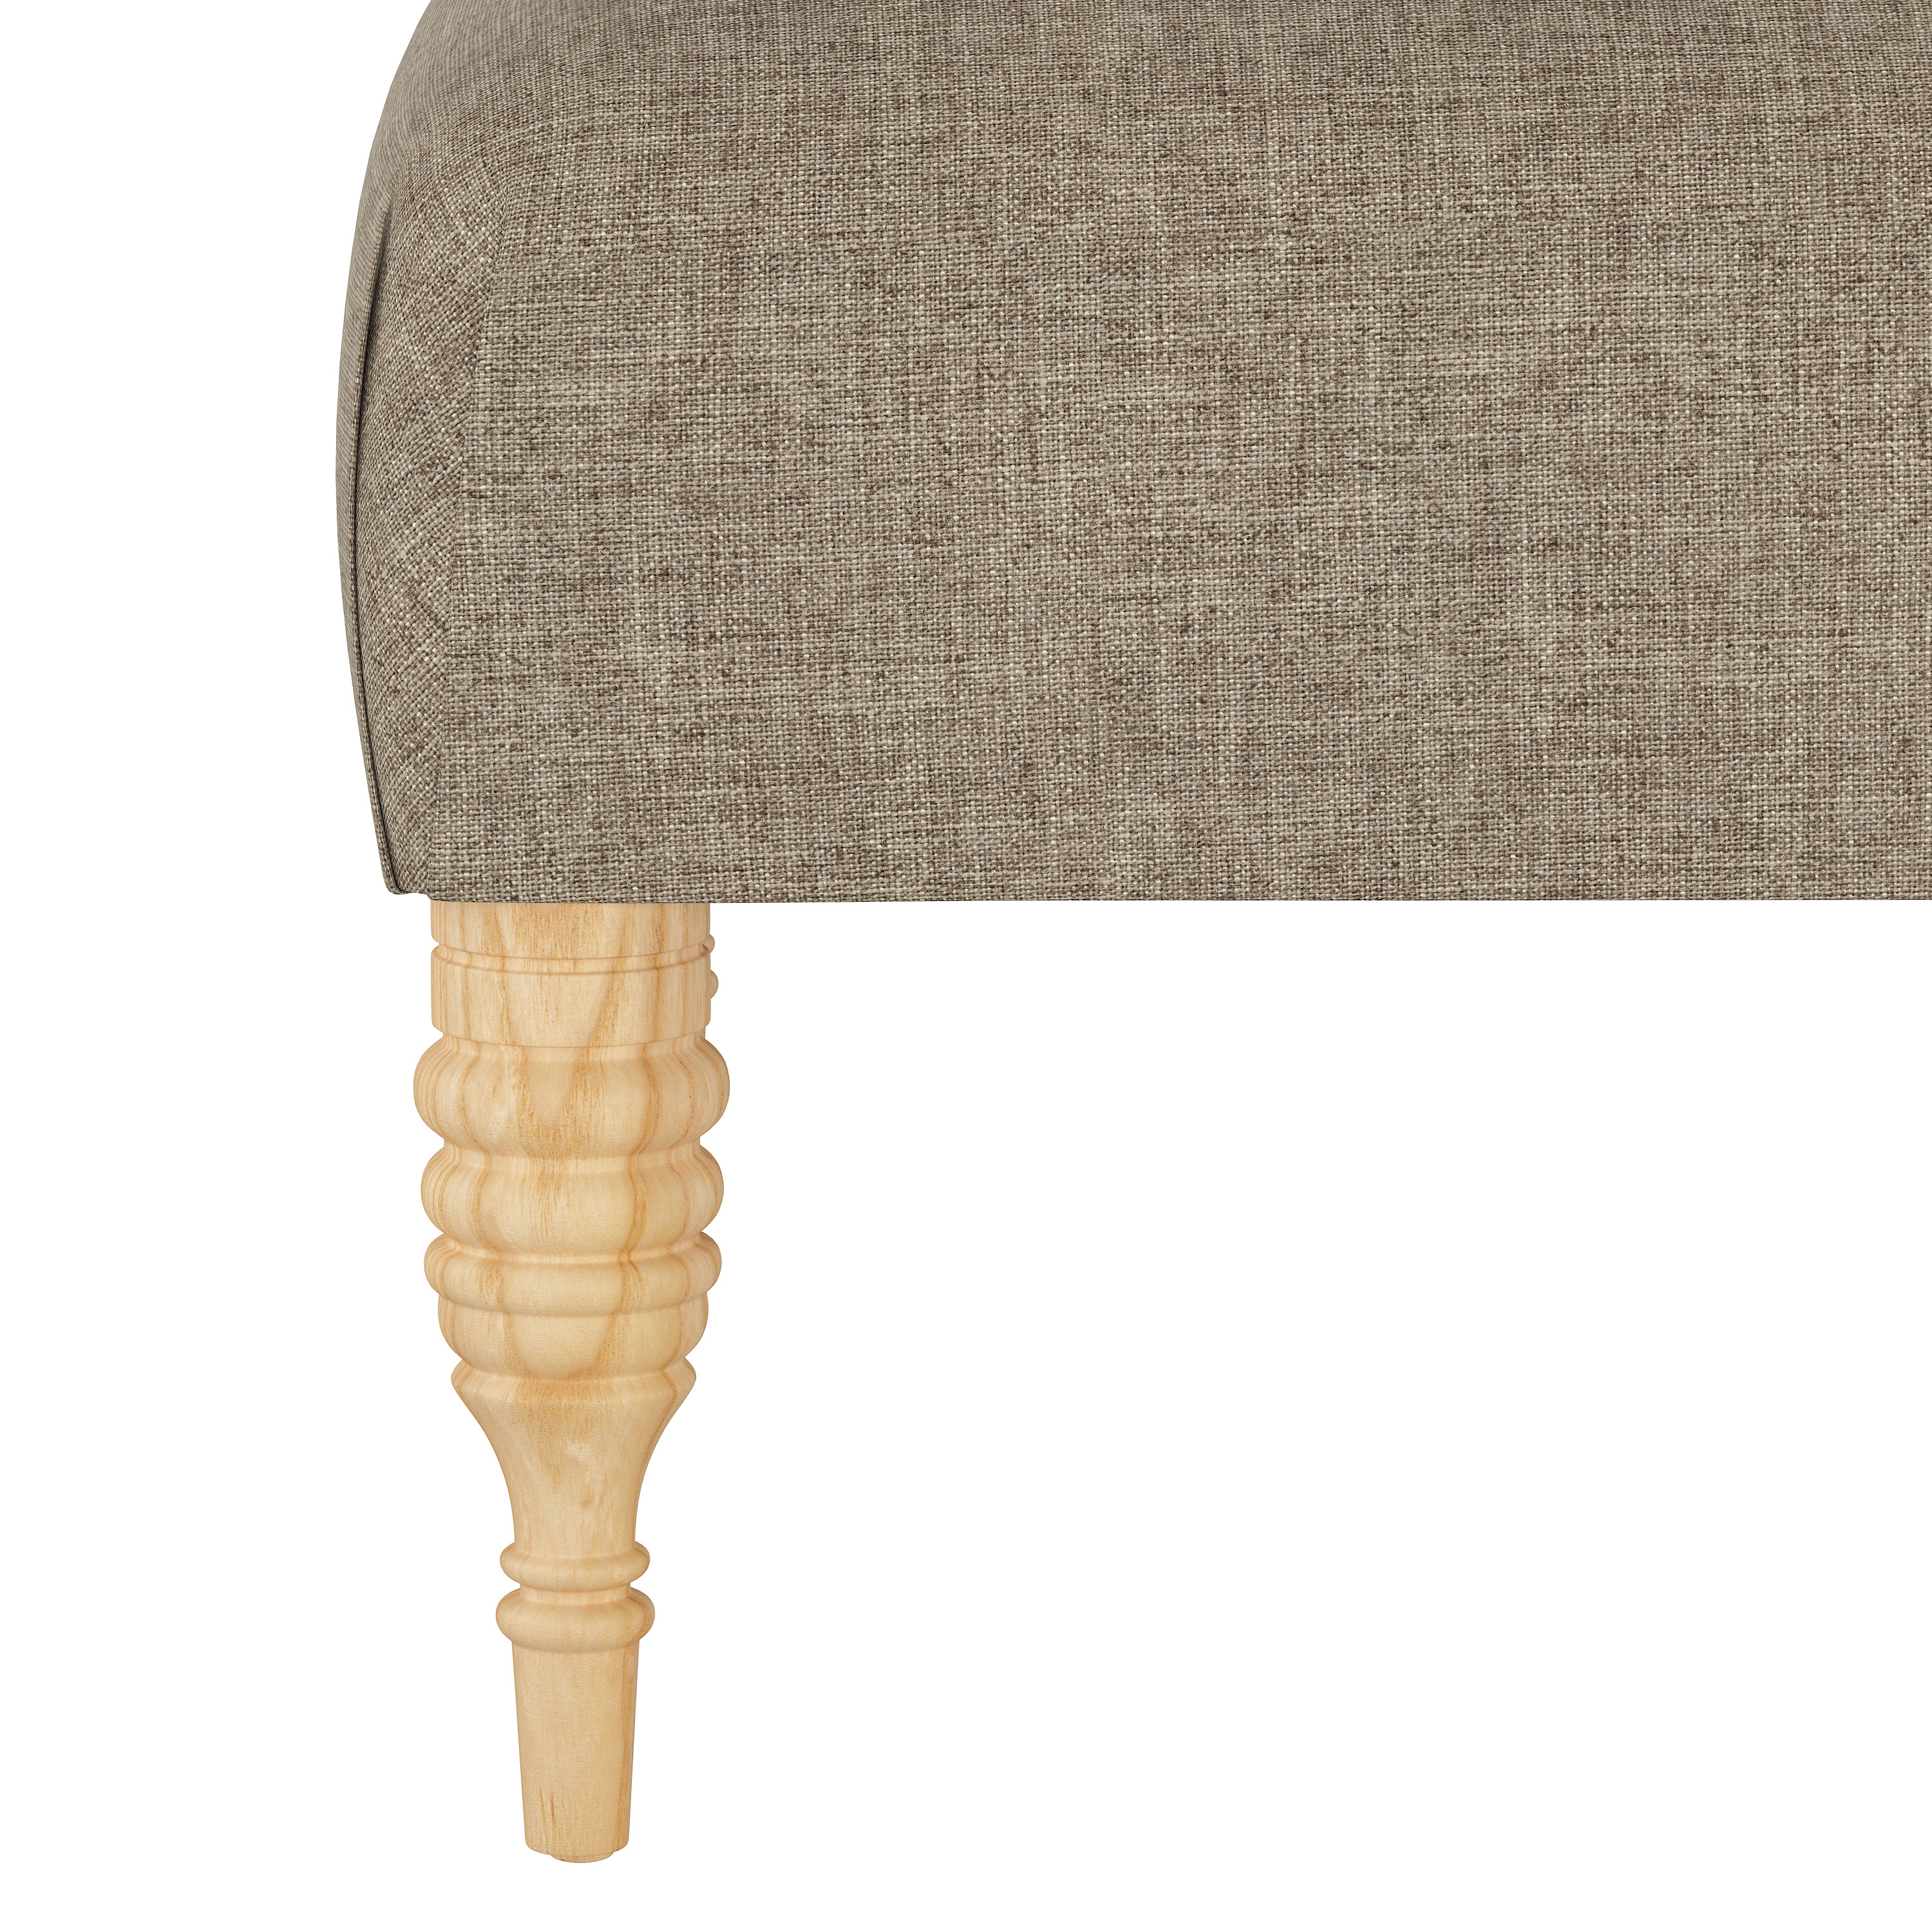 Algren Cocktail Ottoman with Turned Legs - Image 2